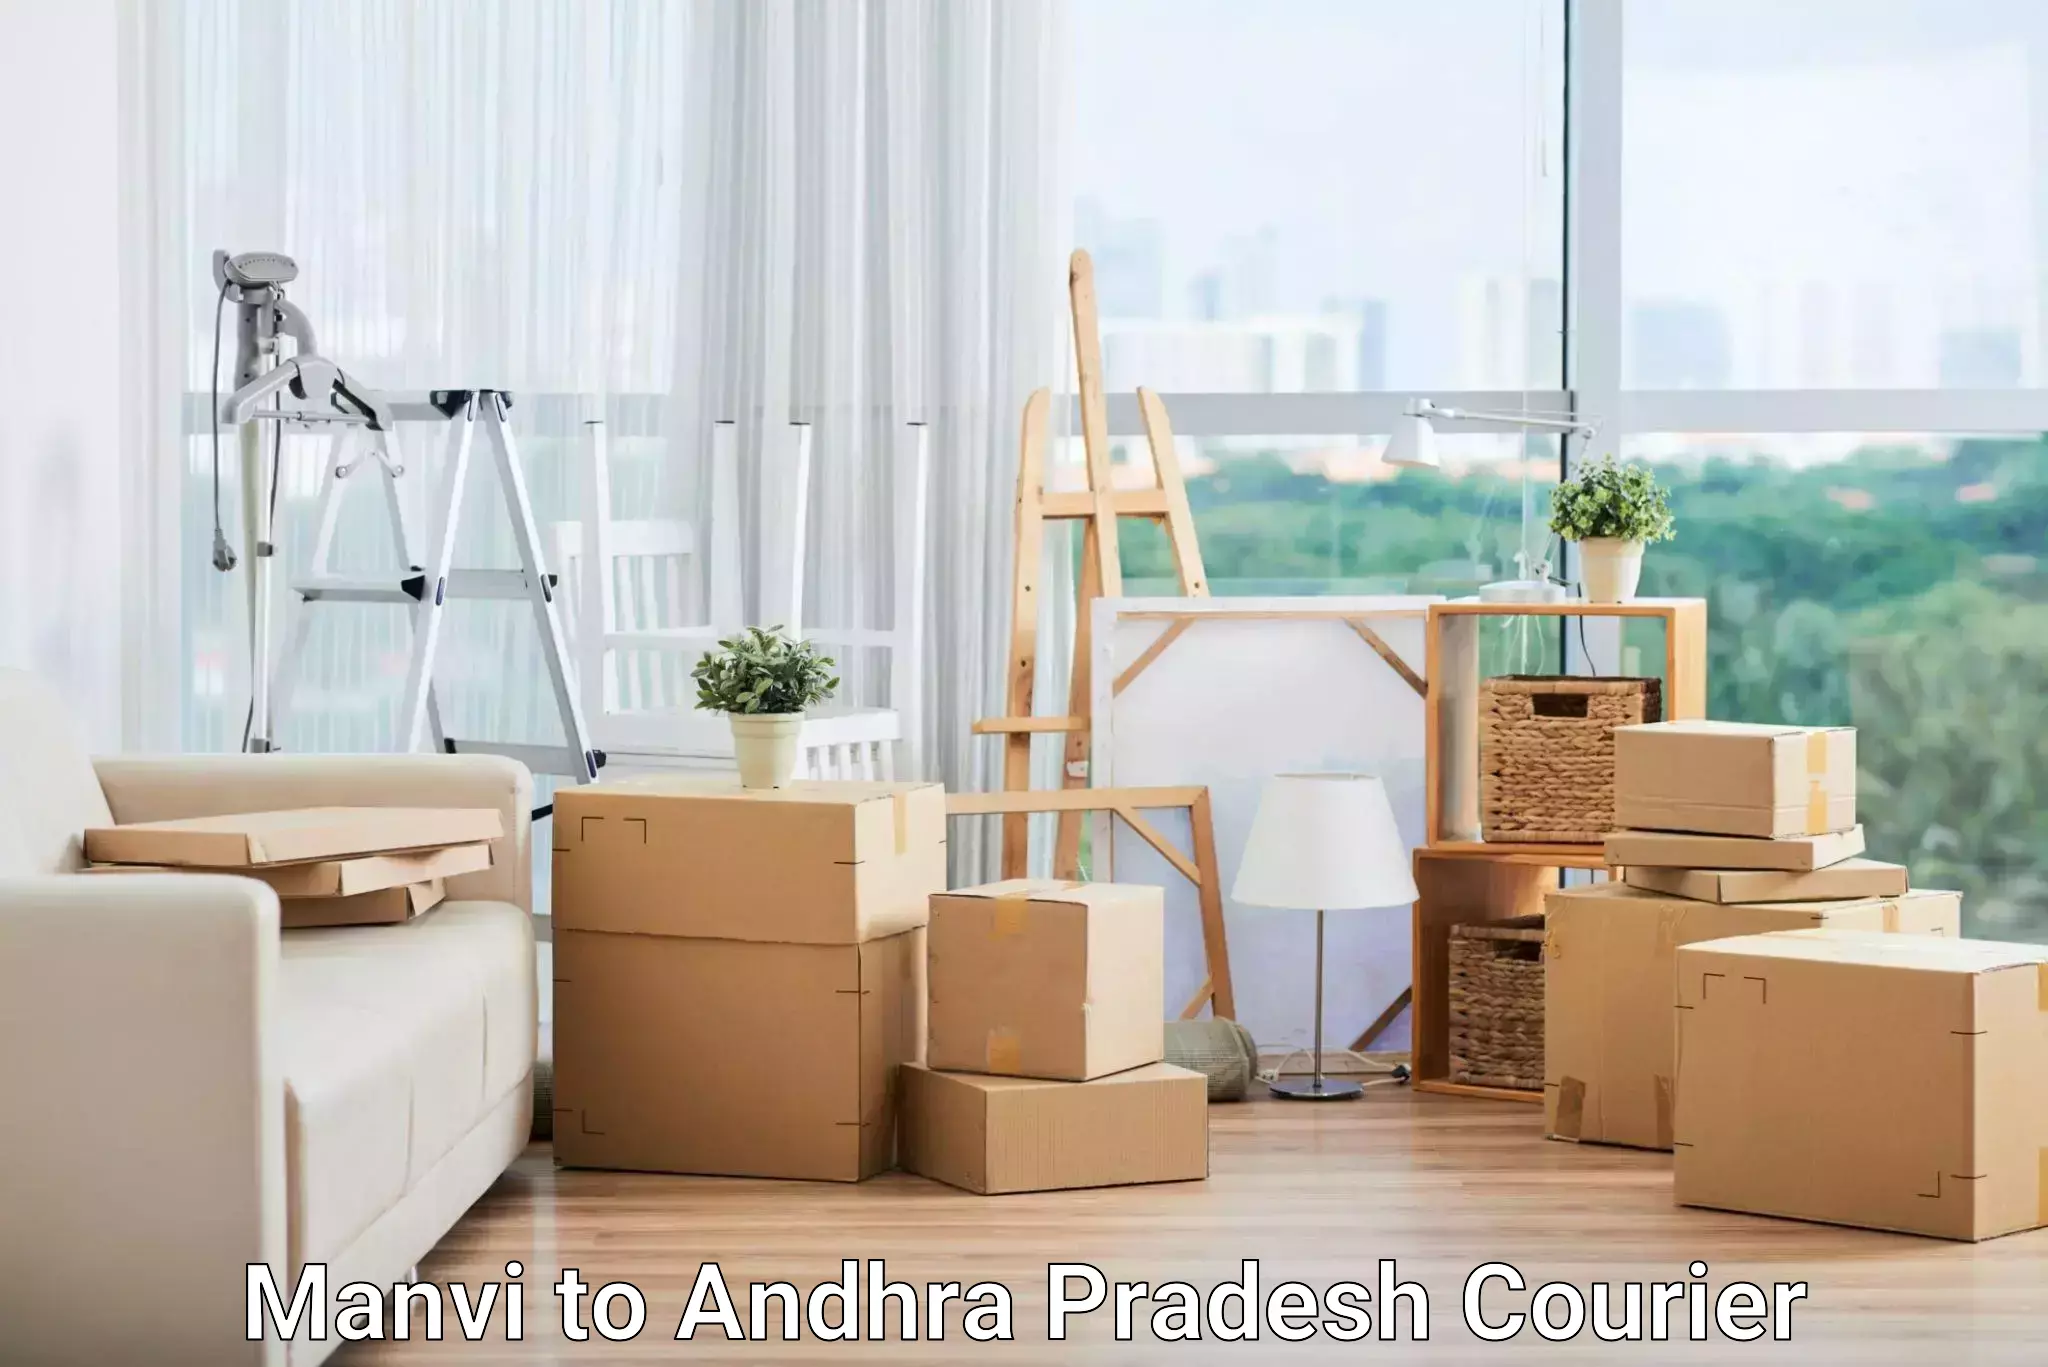 Package delivery network Manvi to Andhra Pradesh